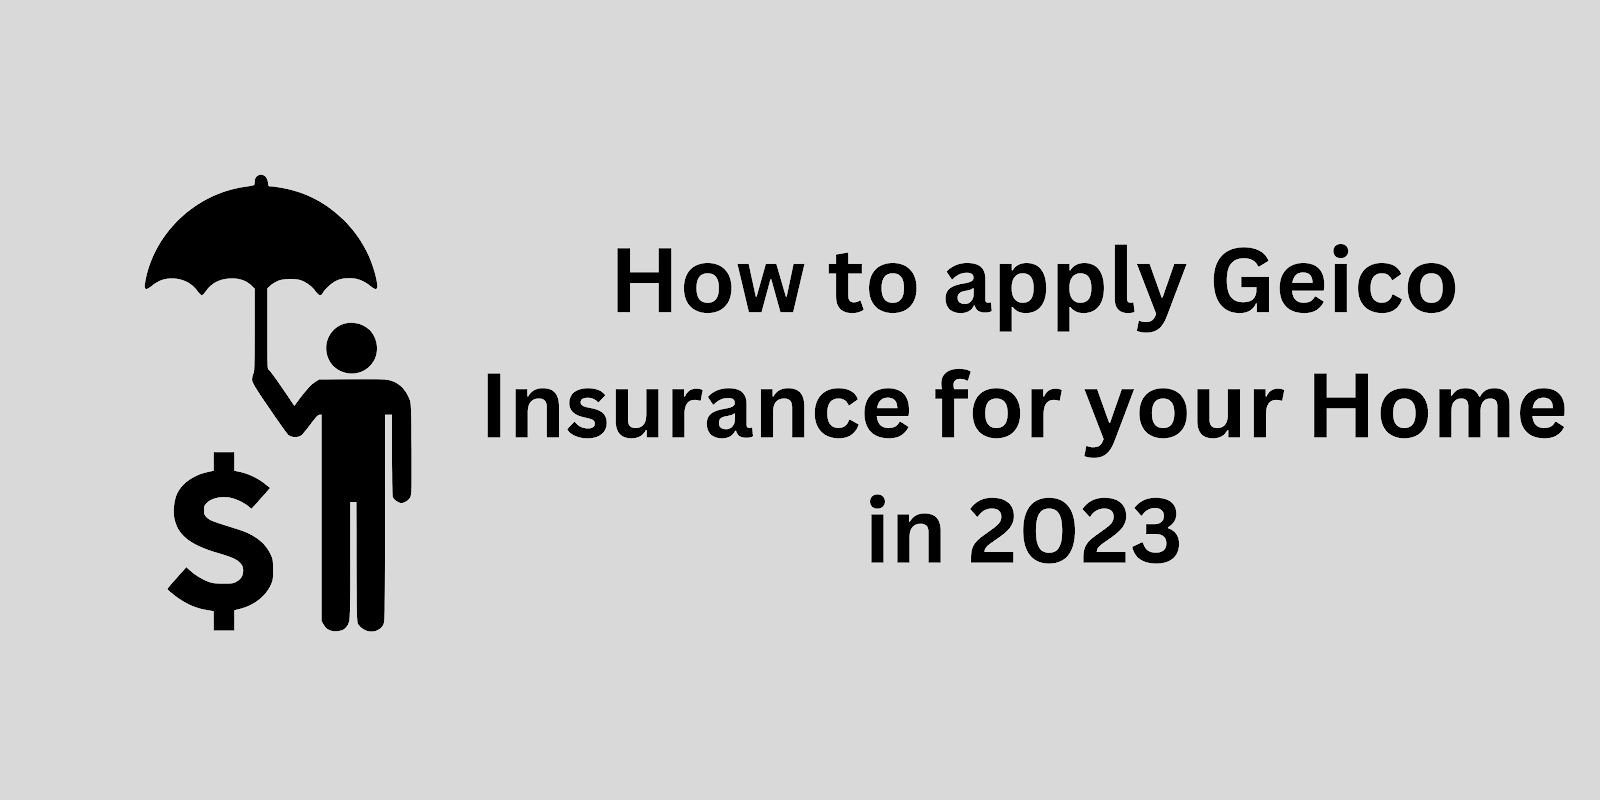 How to Apply for GEICO Insurance for your Home in 2023